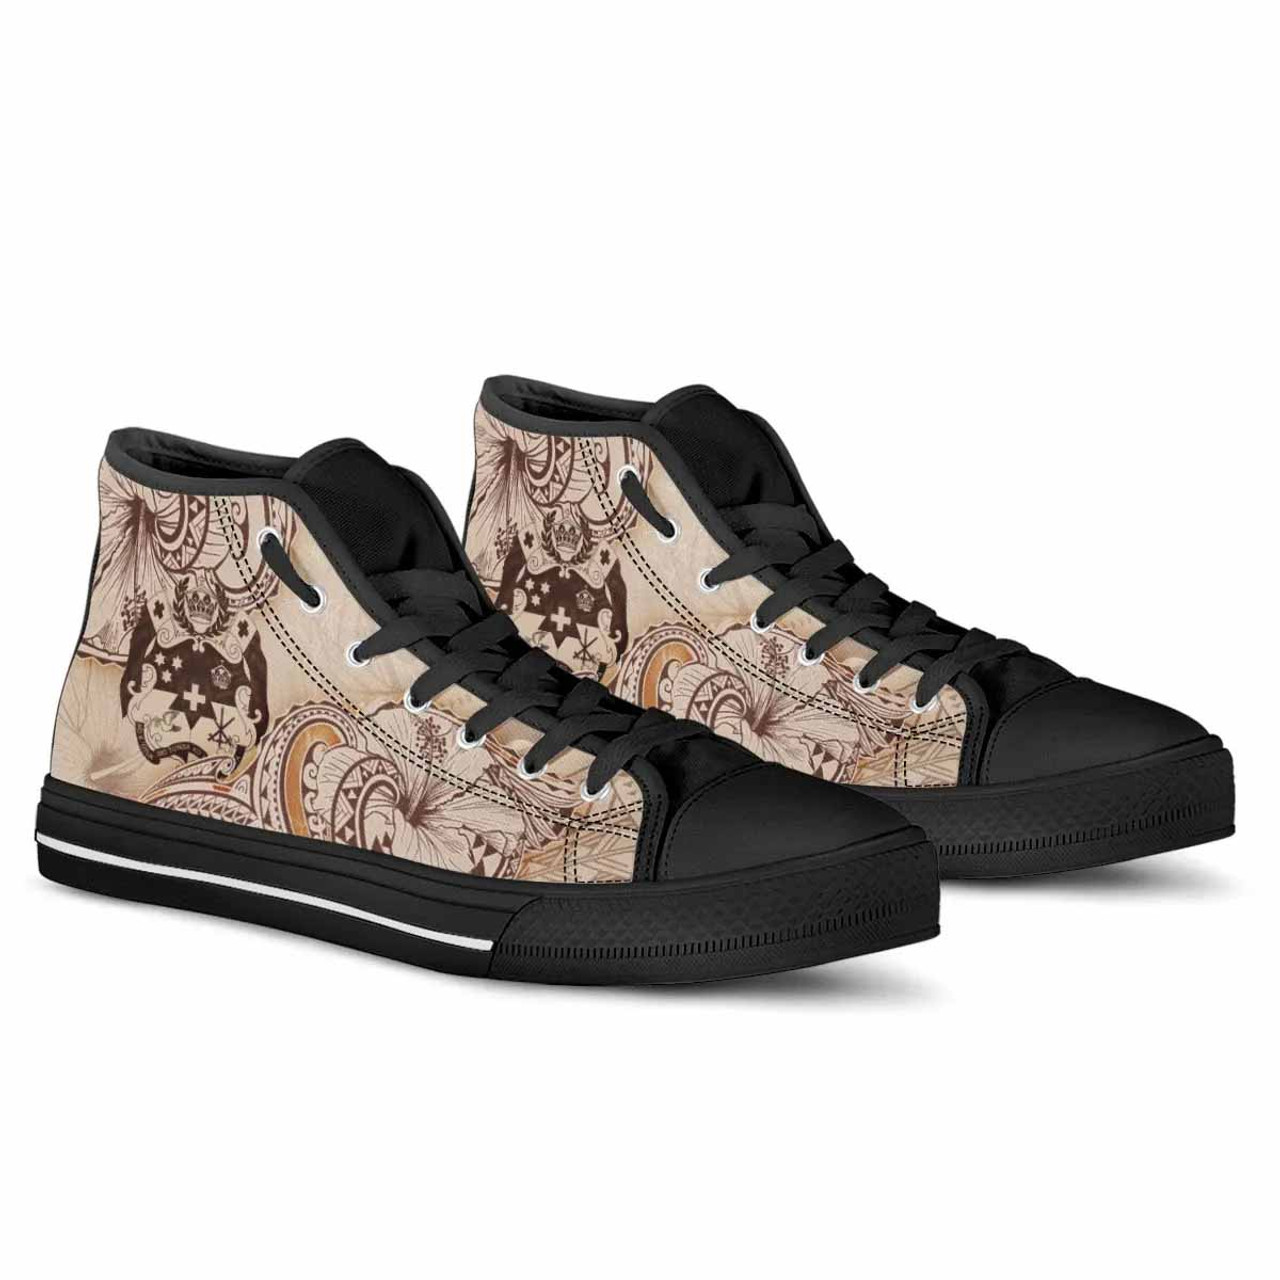 Tonga High Top Shoes - Hibiscus Flowers Vintage Style 4